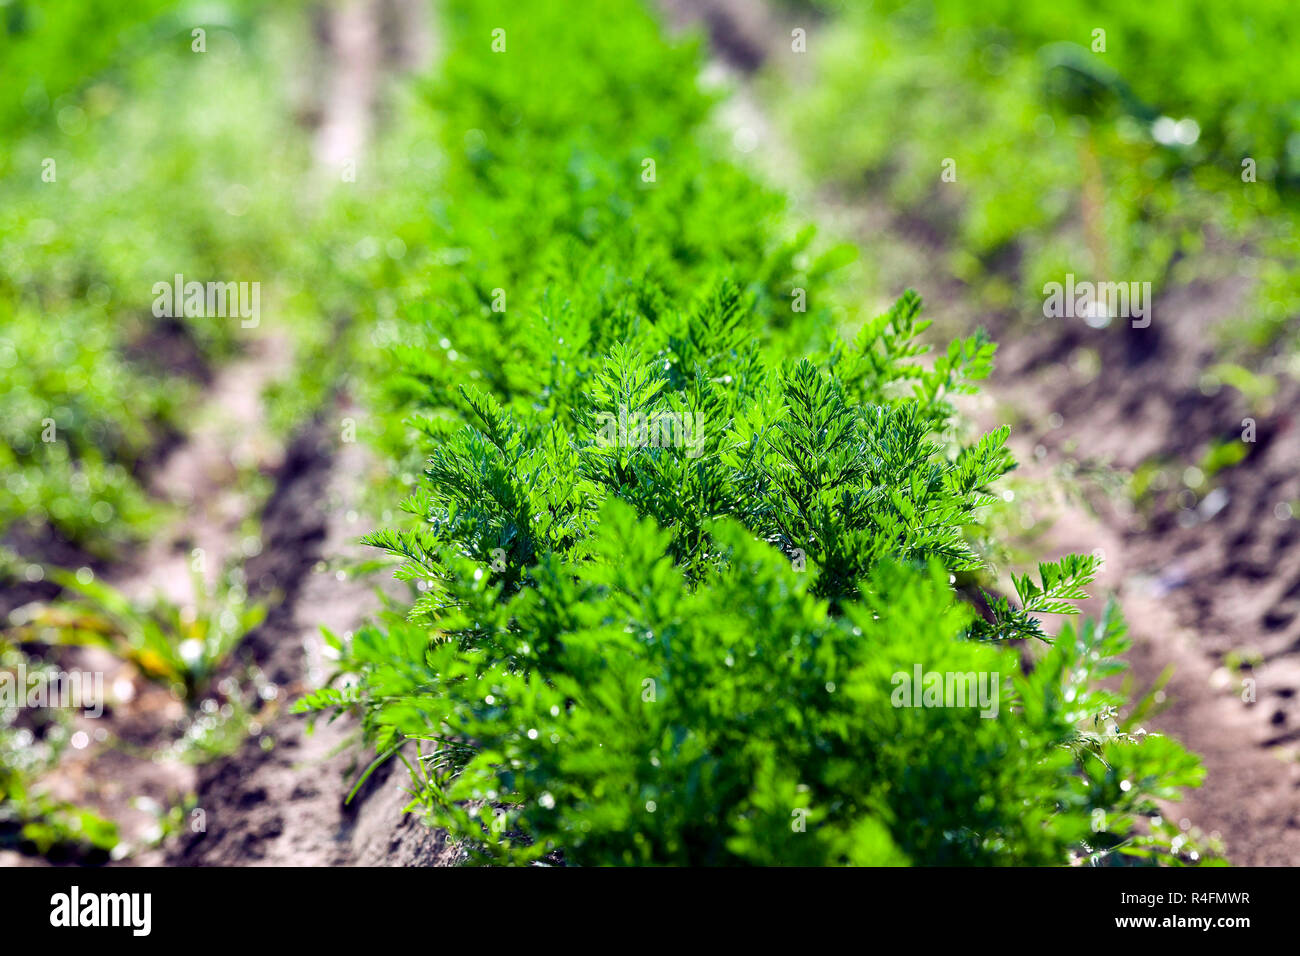 Field with carrot Stock Photo